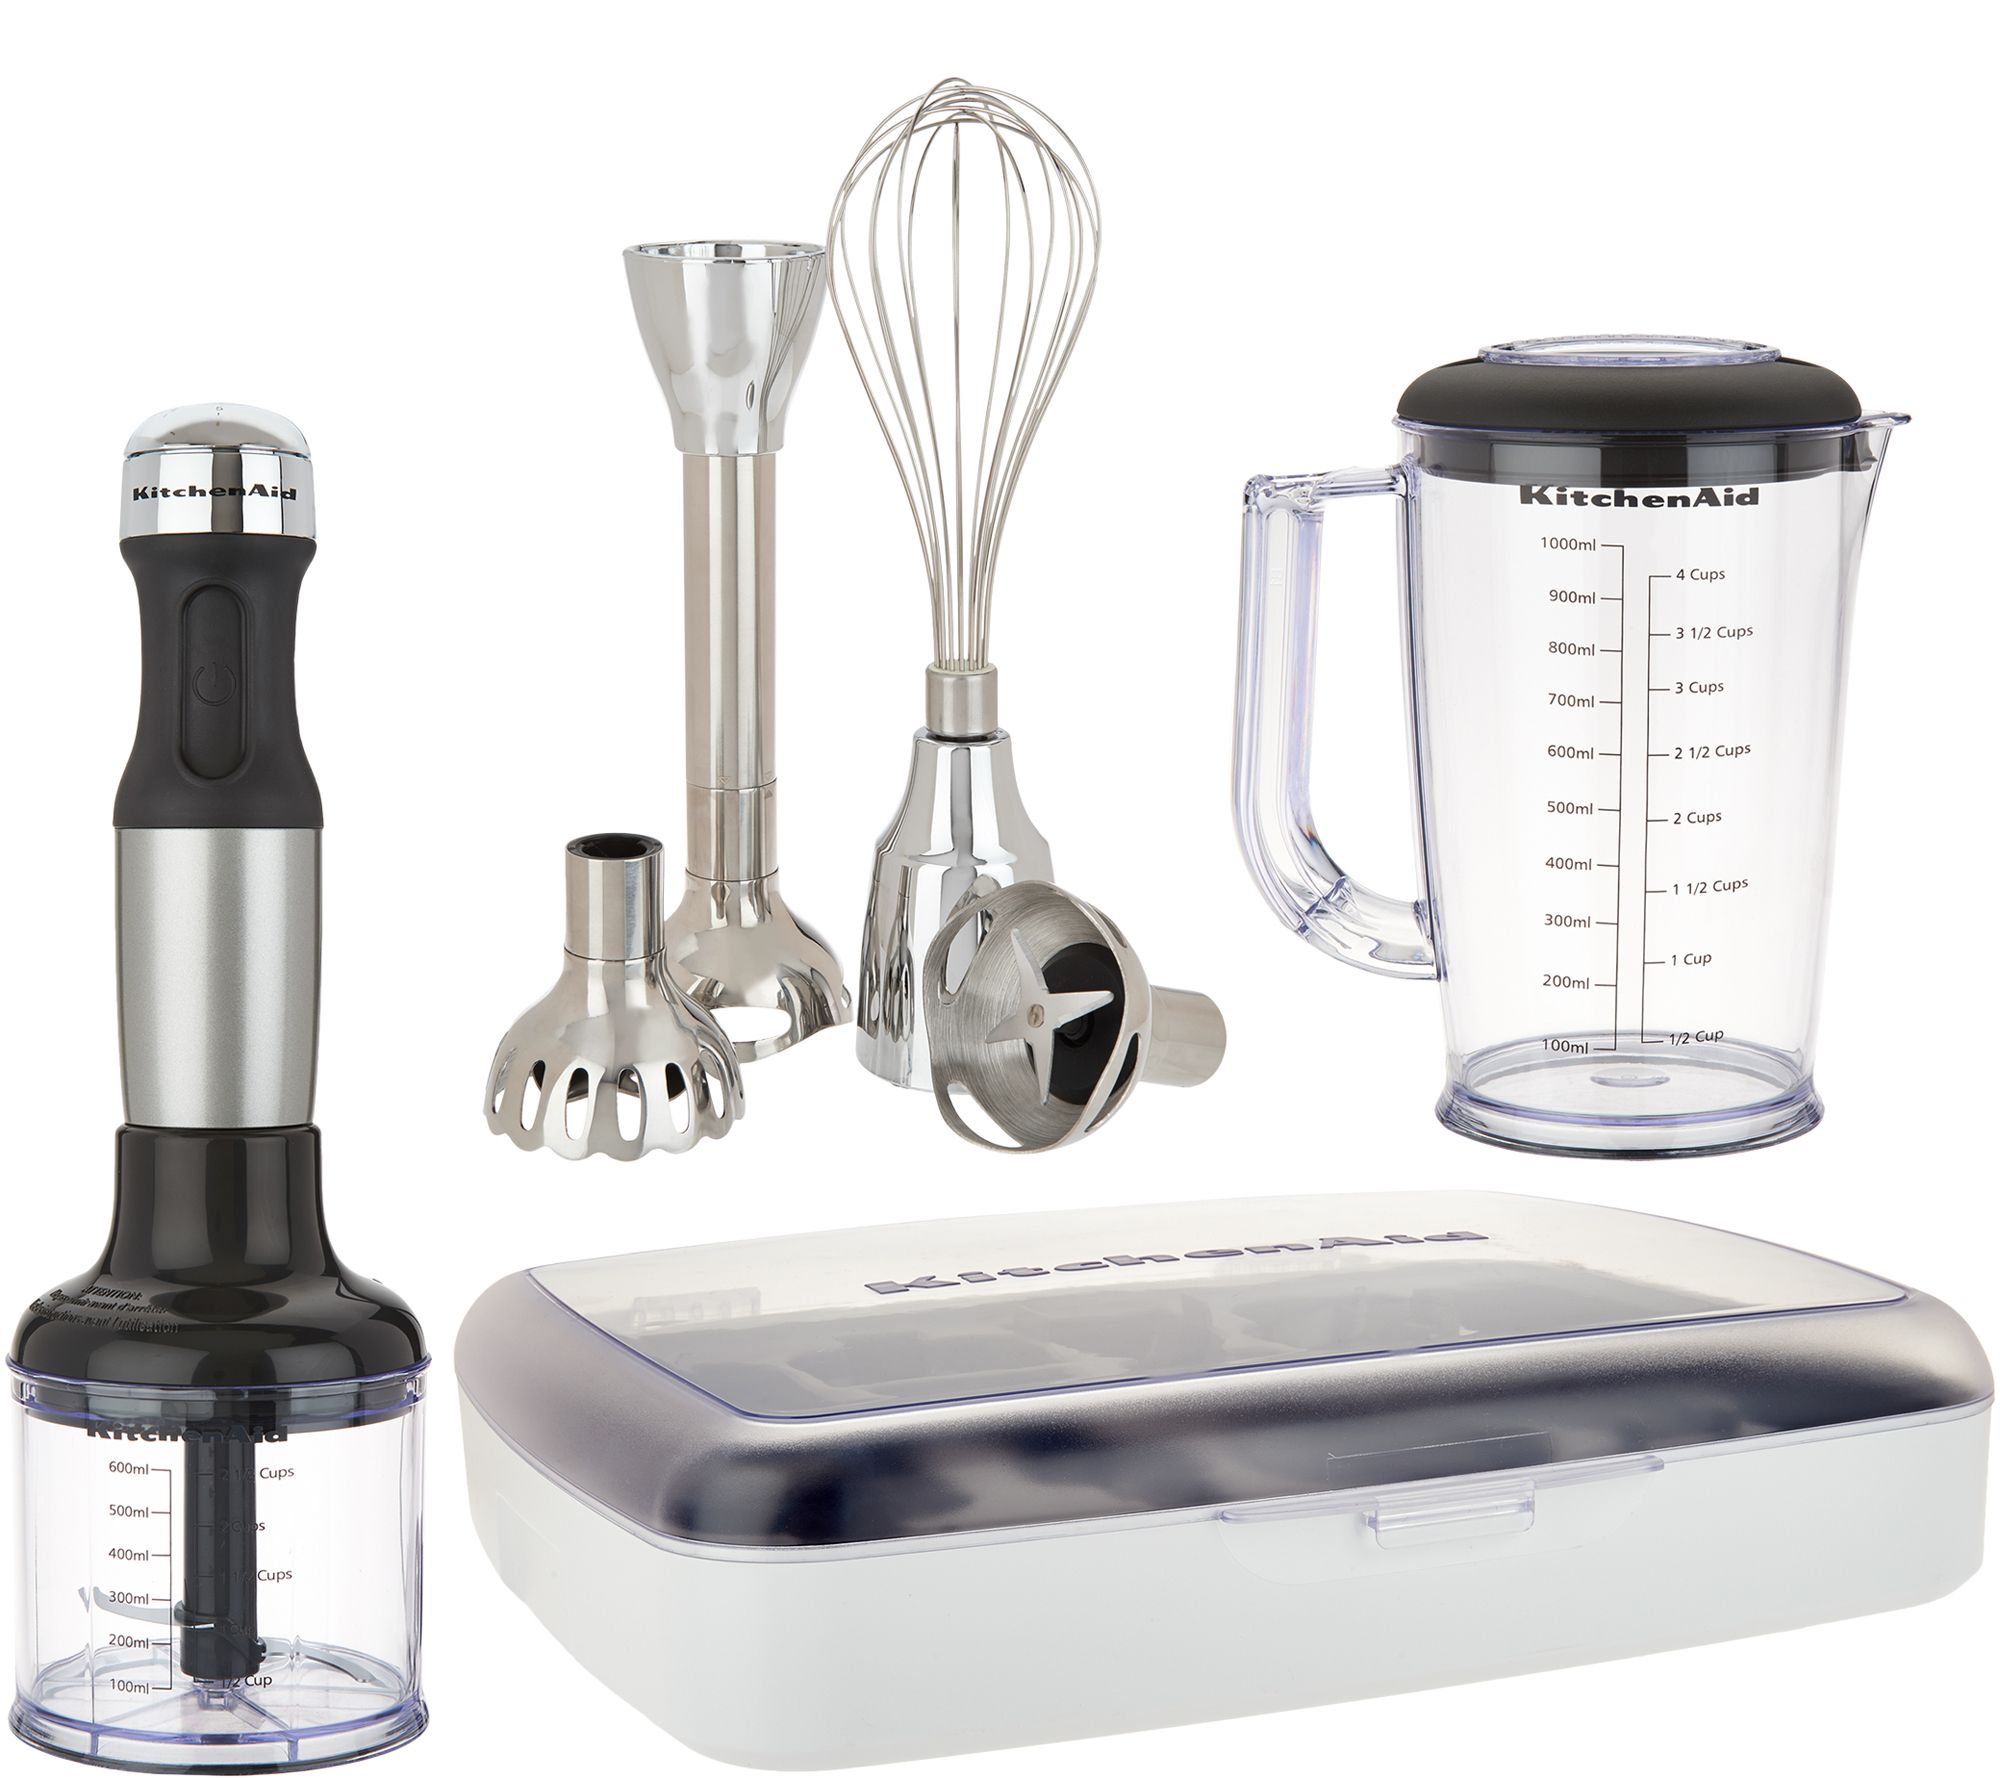 KitchenAid 5 Speed Immersion Blender w/ Case And QVC.com